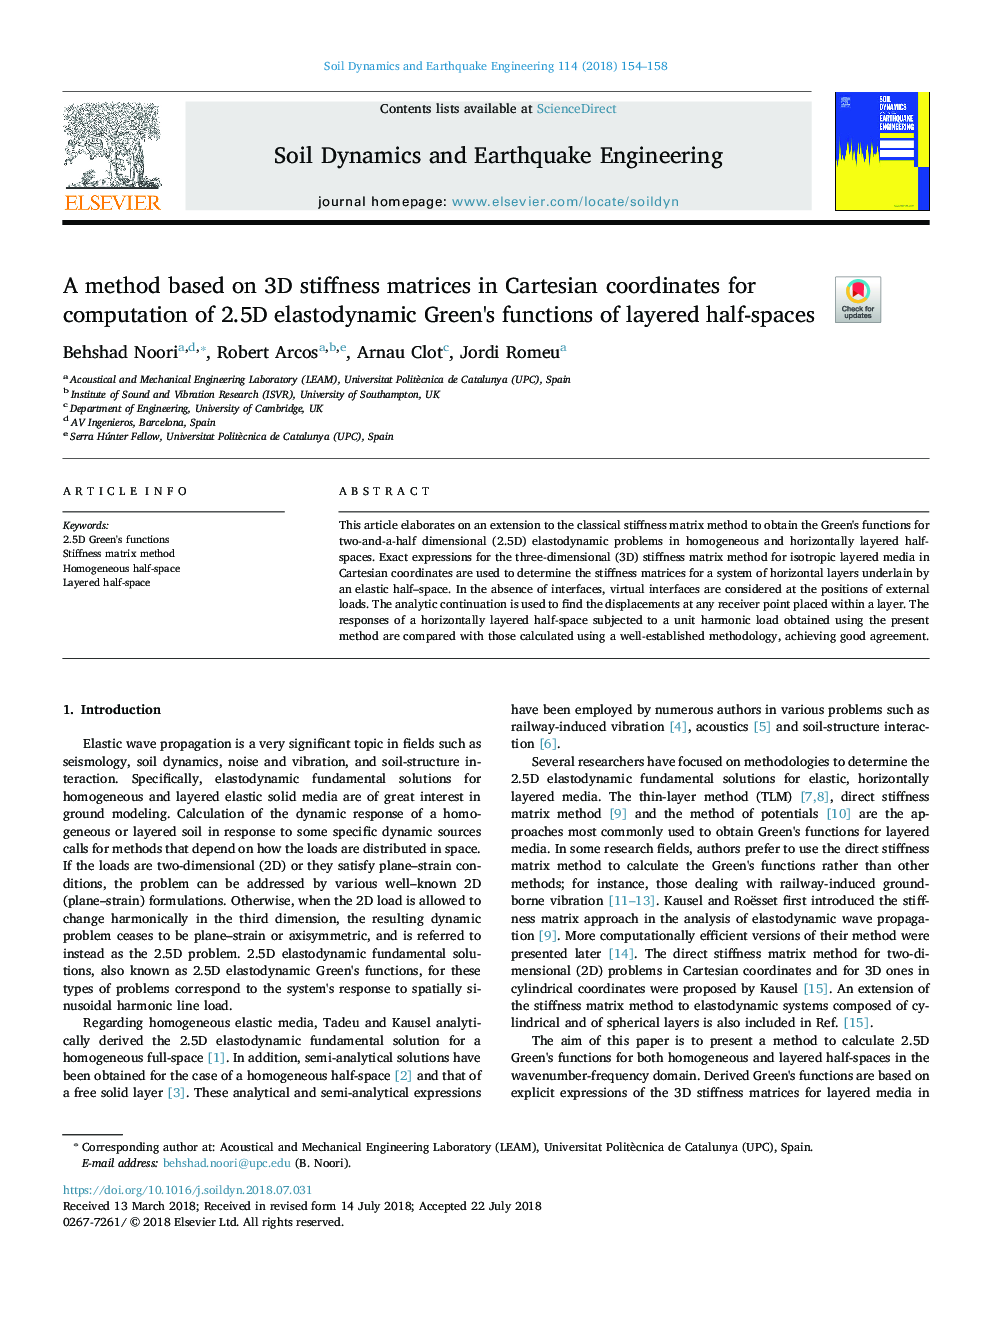 A method based on 3D stiffness matrices in Cartesian coordinates for computation of 2.5D elastodynamic Green's functions of layered half-spaces